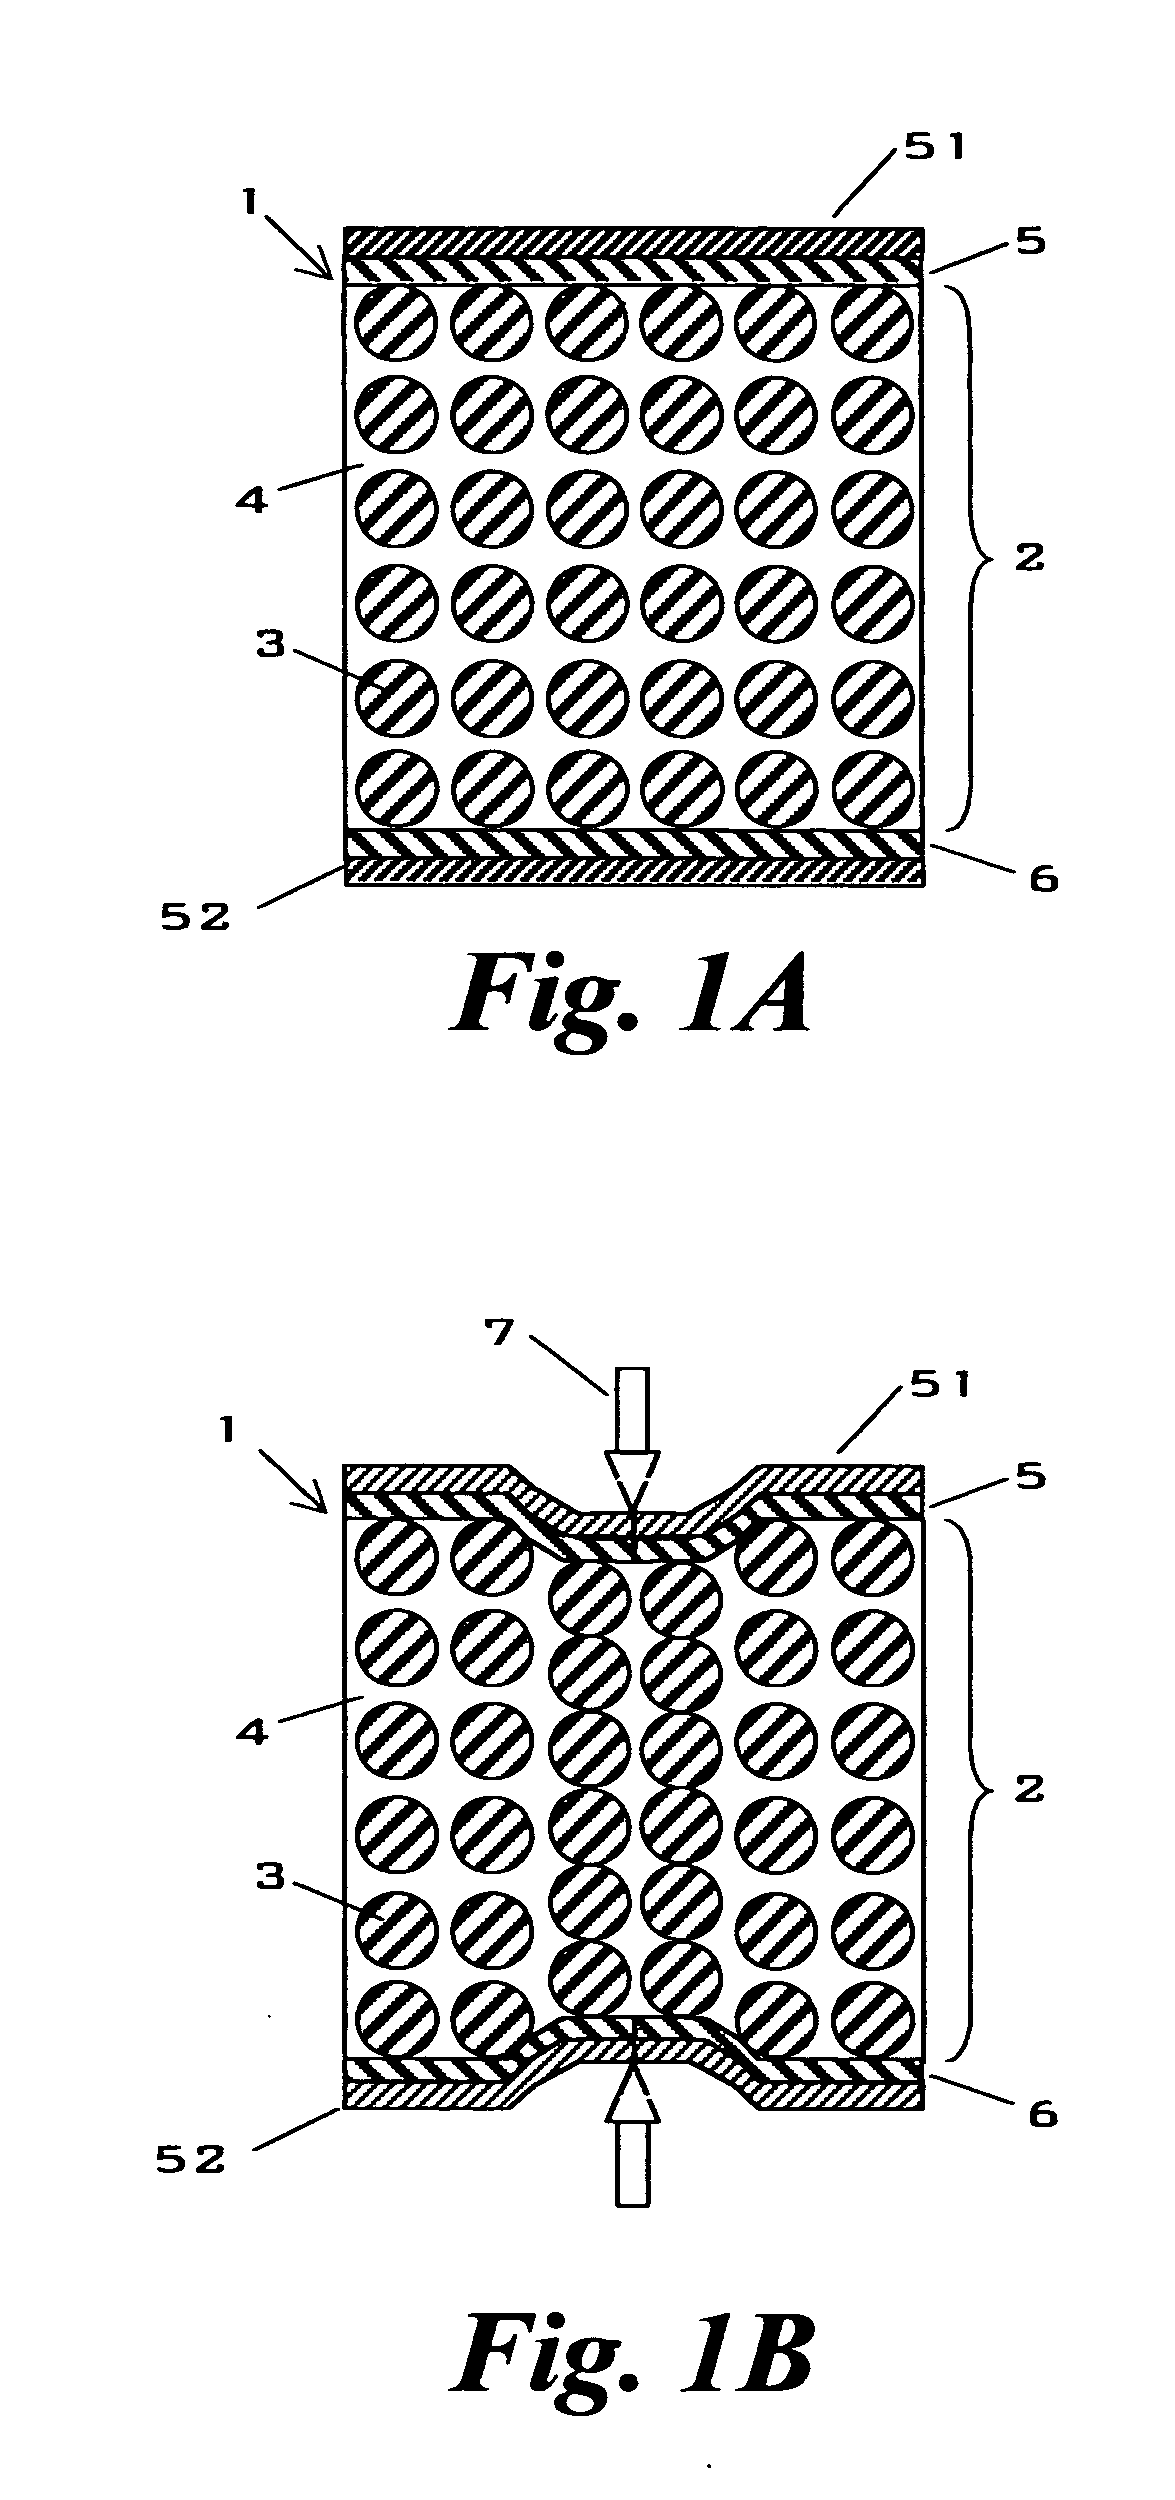 High-sensitivity pressure conduction sensor for localized pressures and stresses